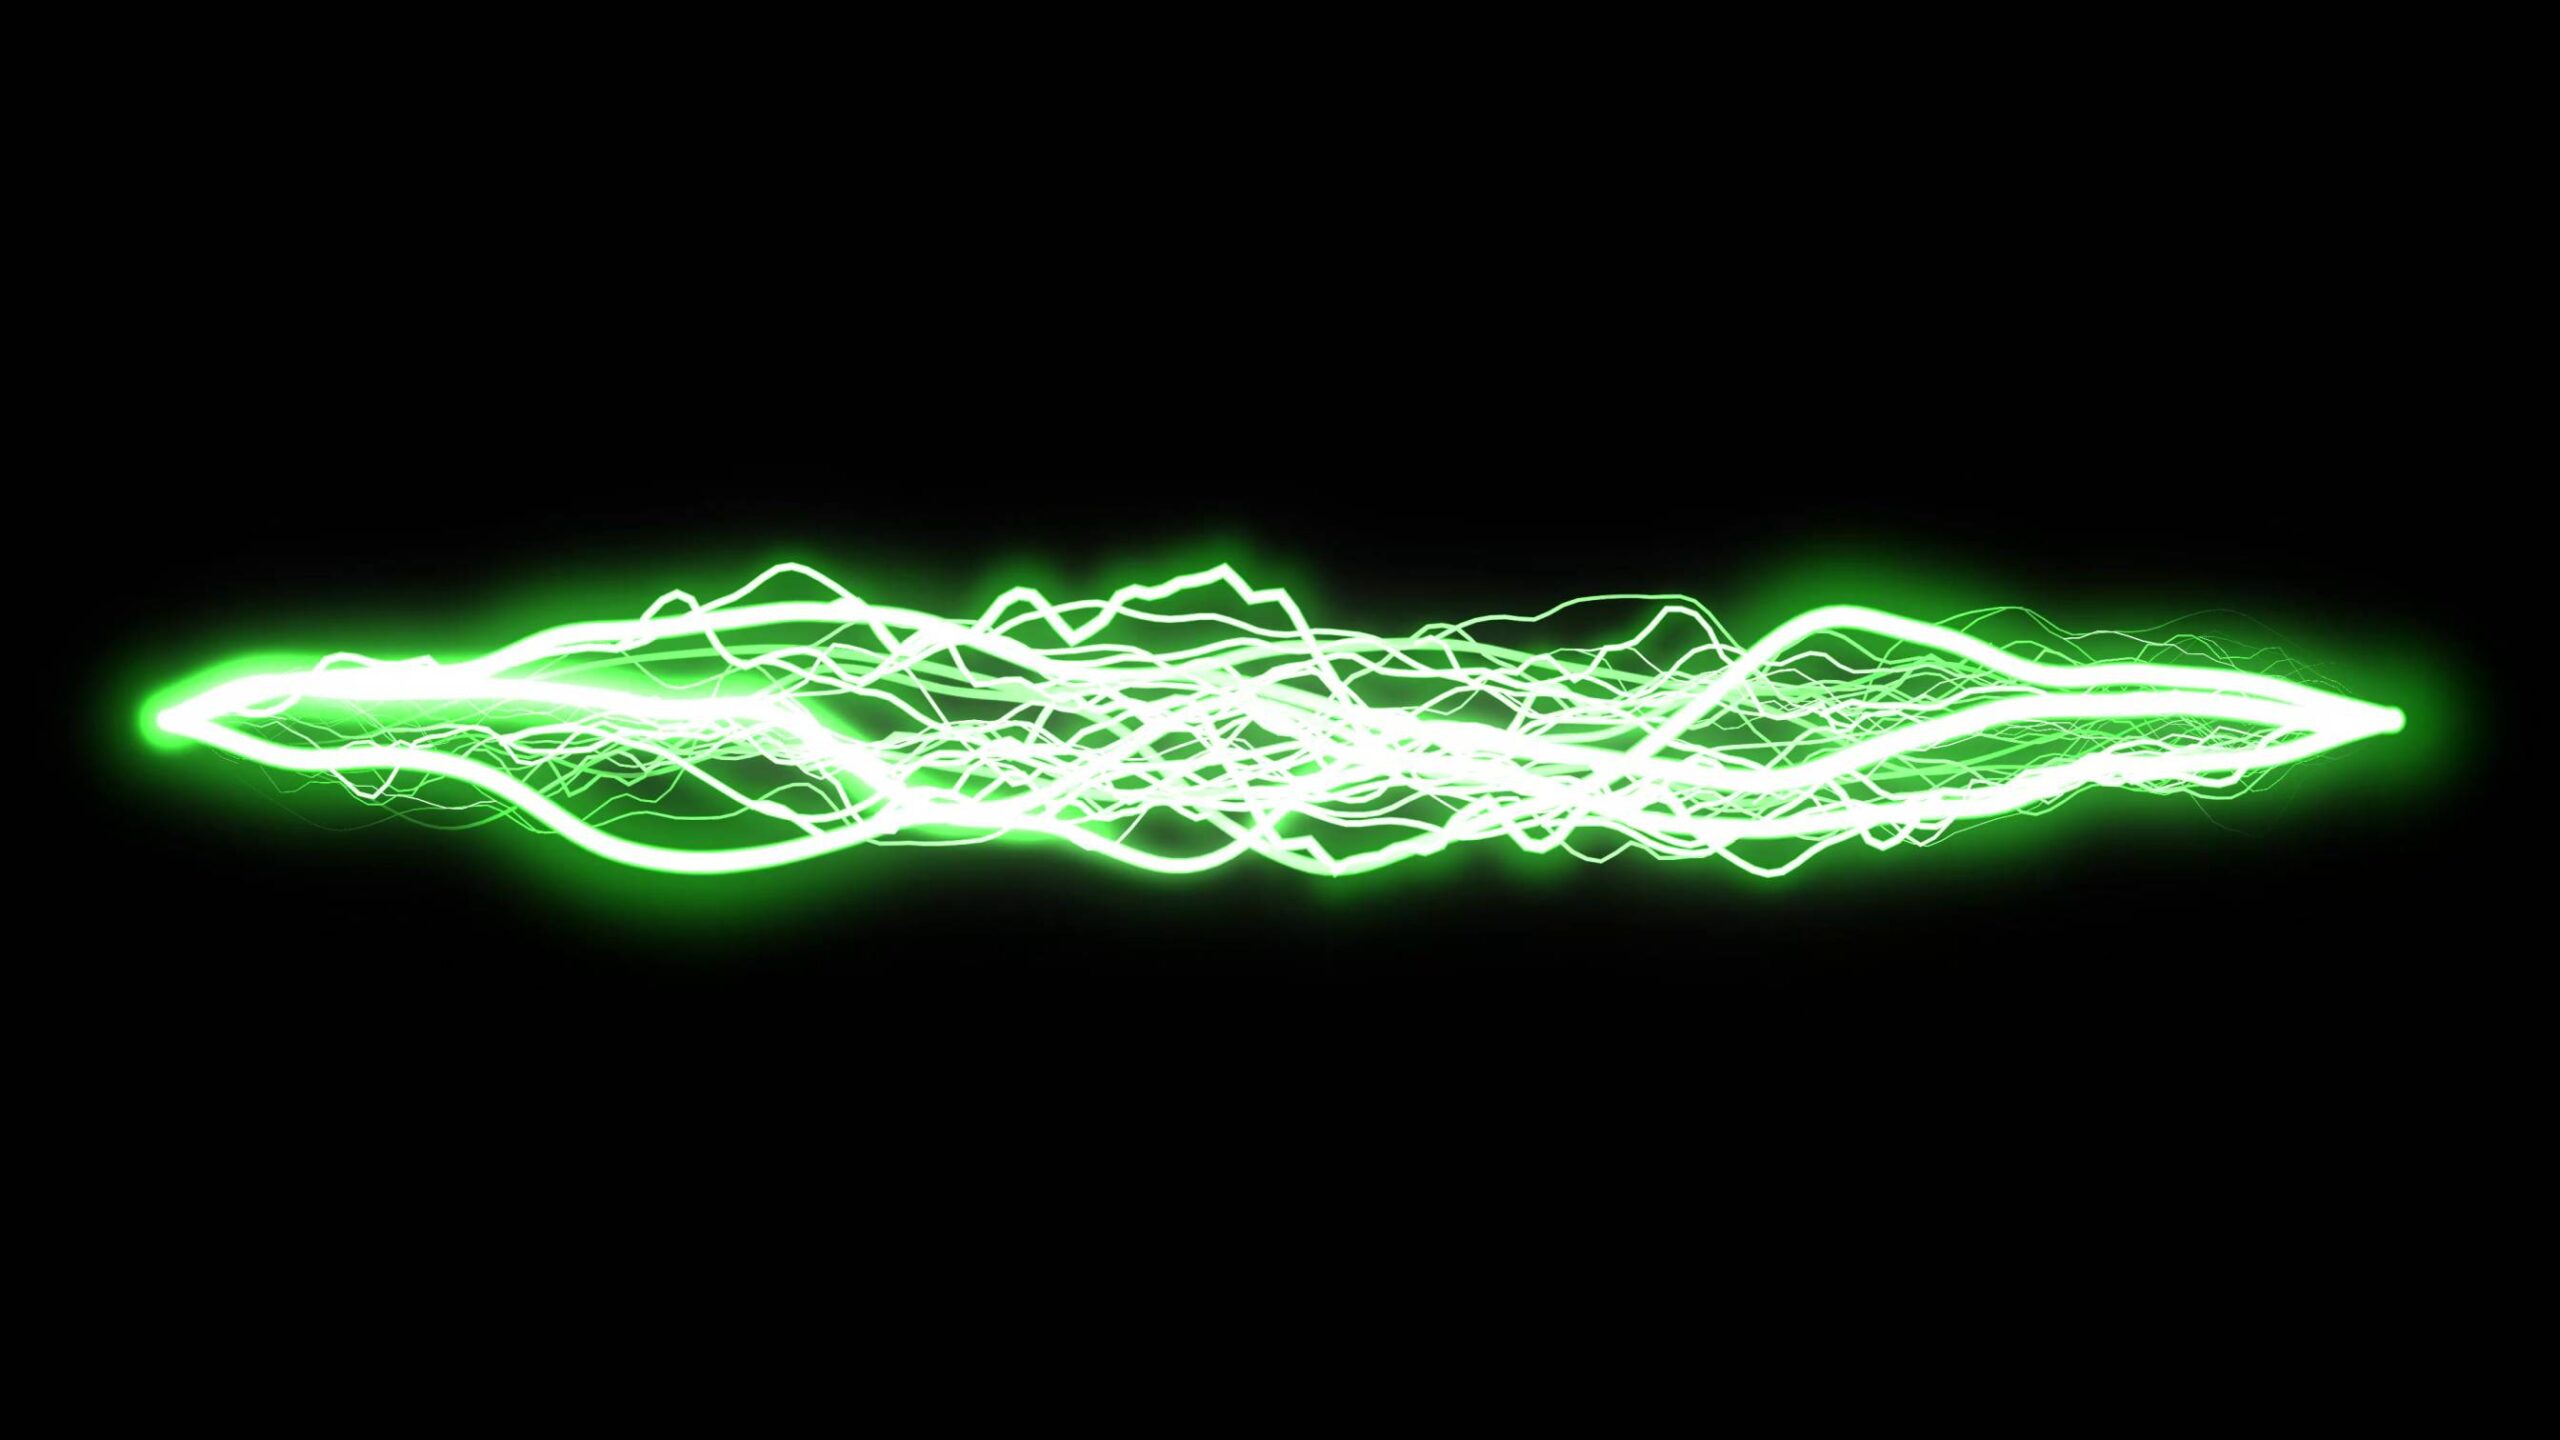 4k Green Electricity Overlay Effect Free Download || Overlay Effect For Editing